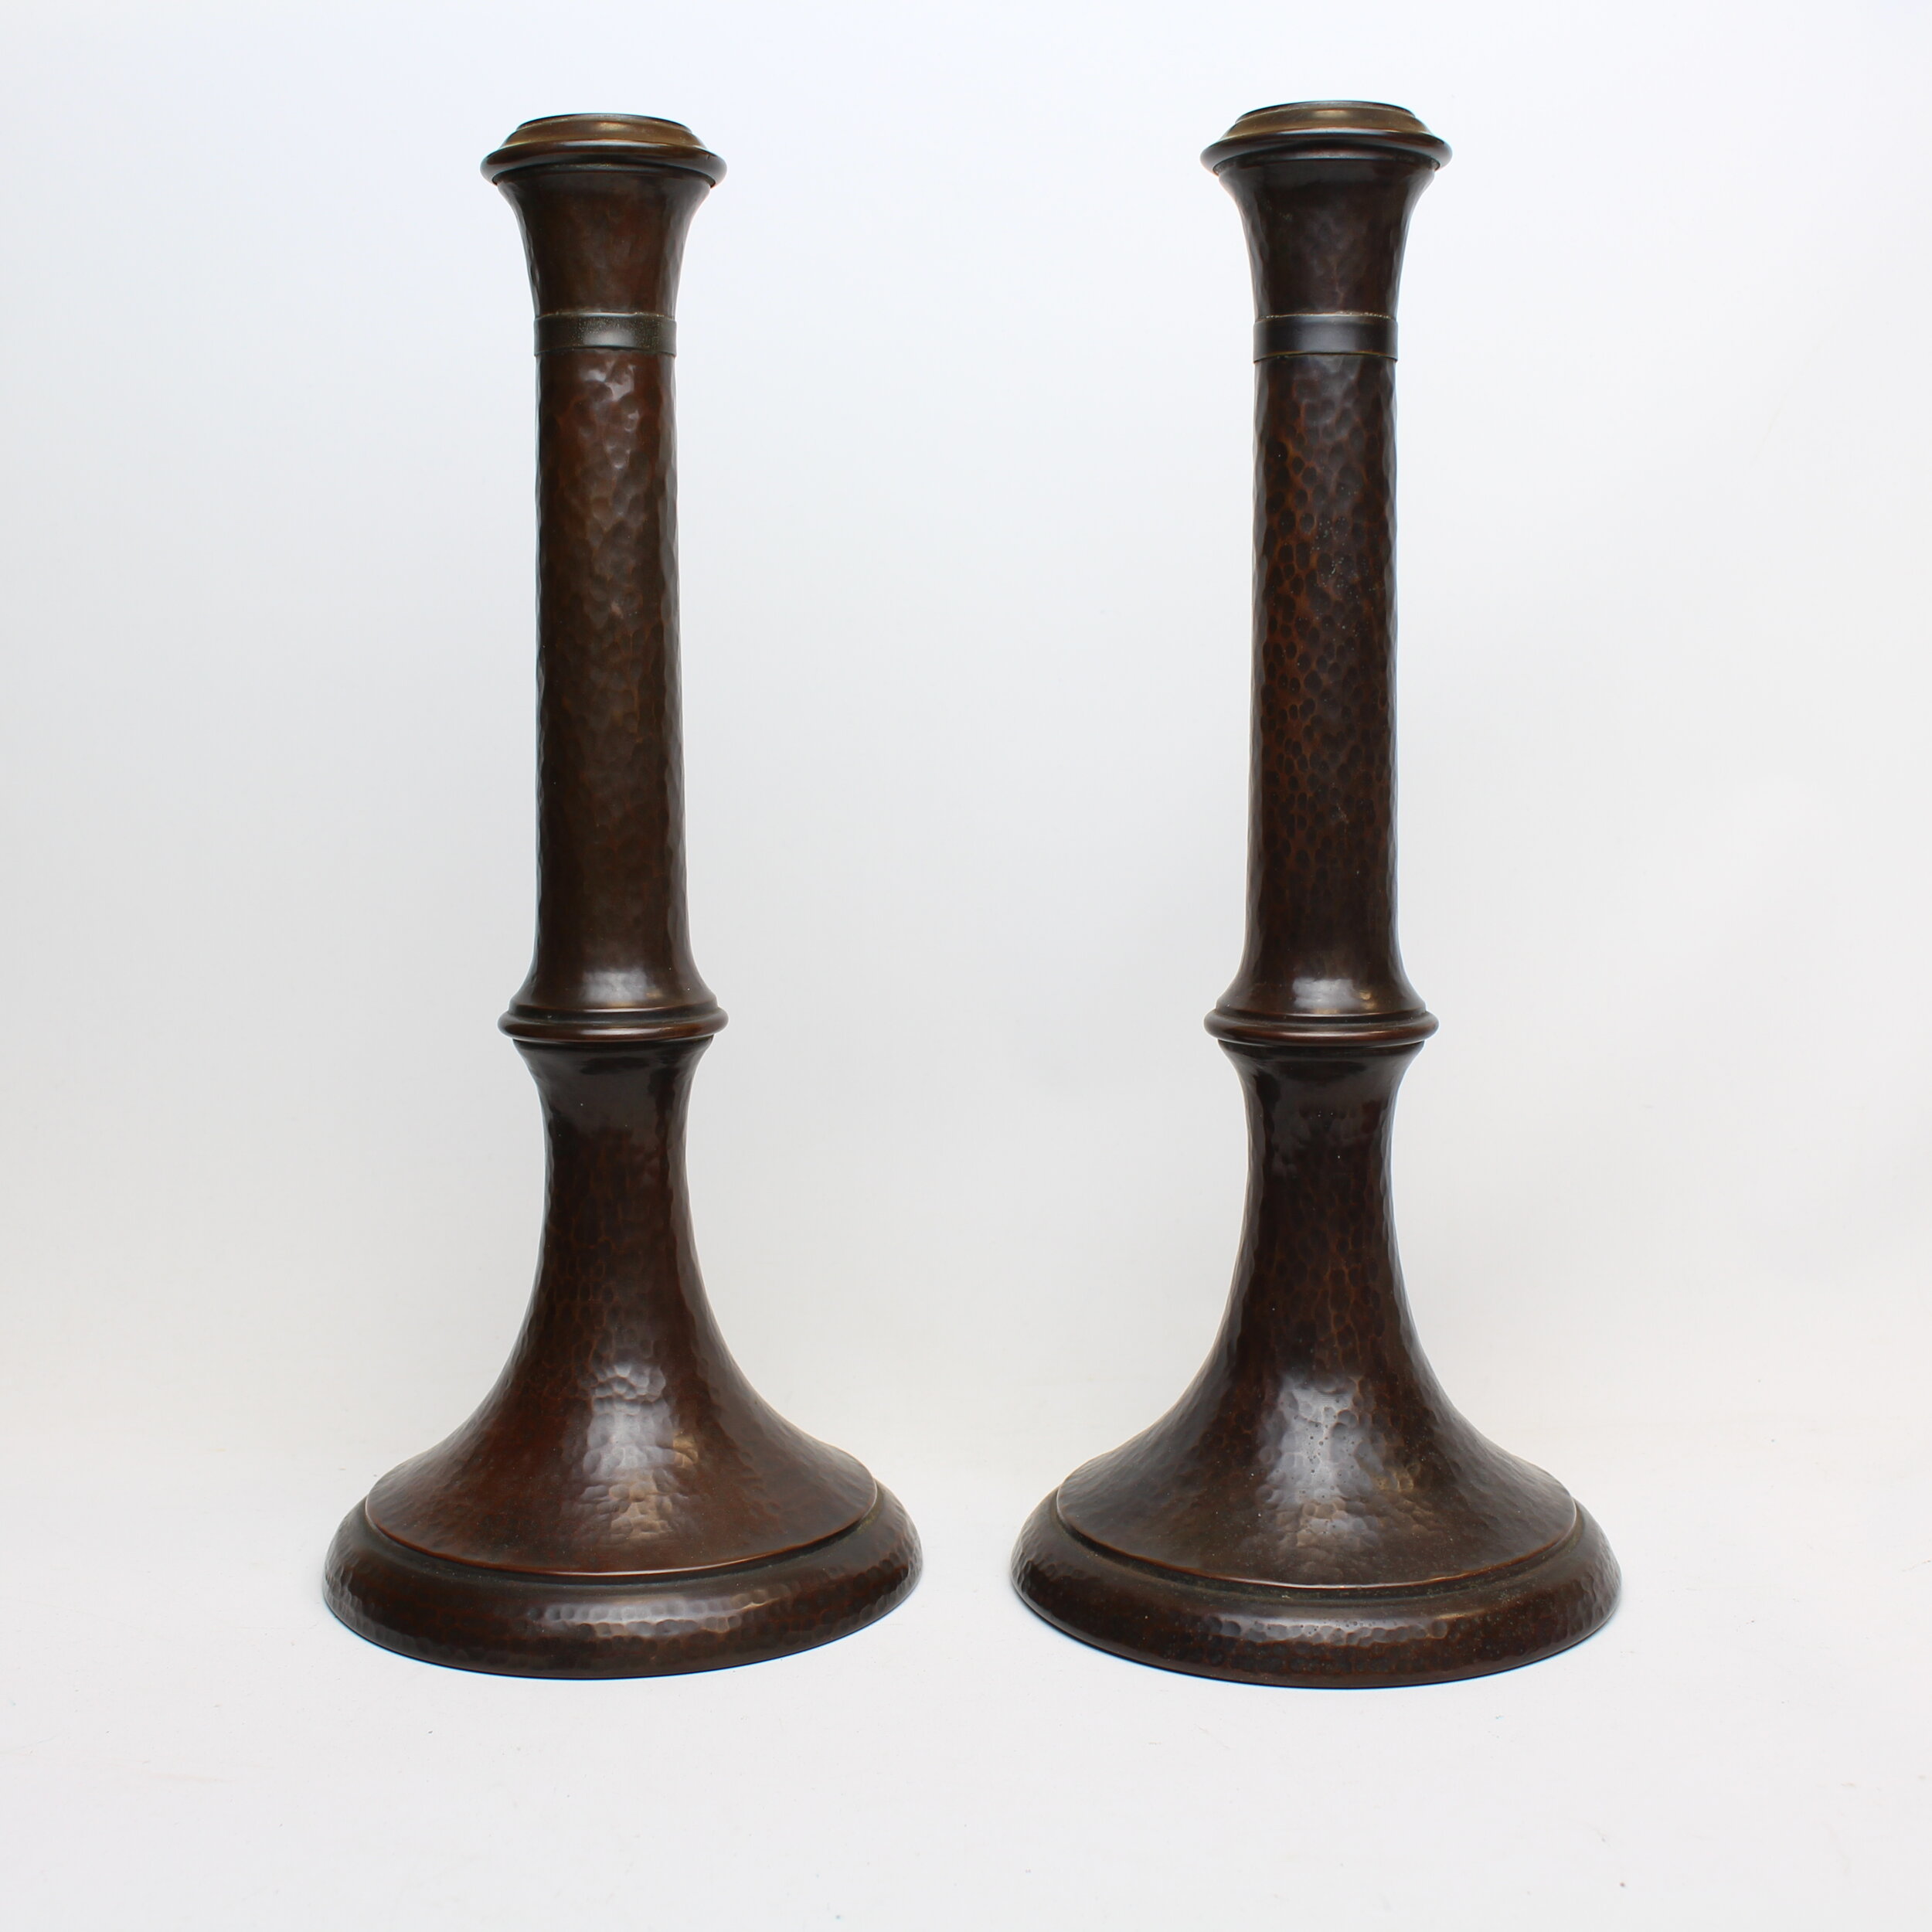 SOLD, Stickley Brothers Tall Candlesticks